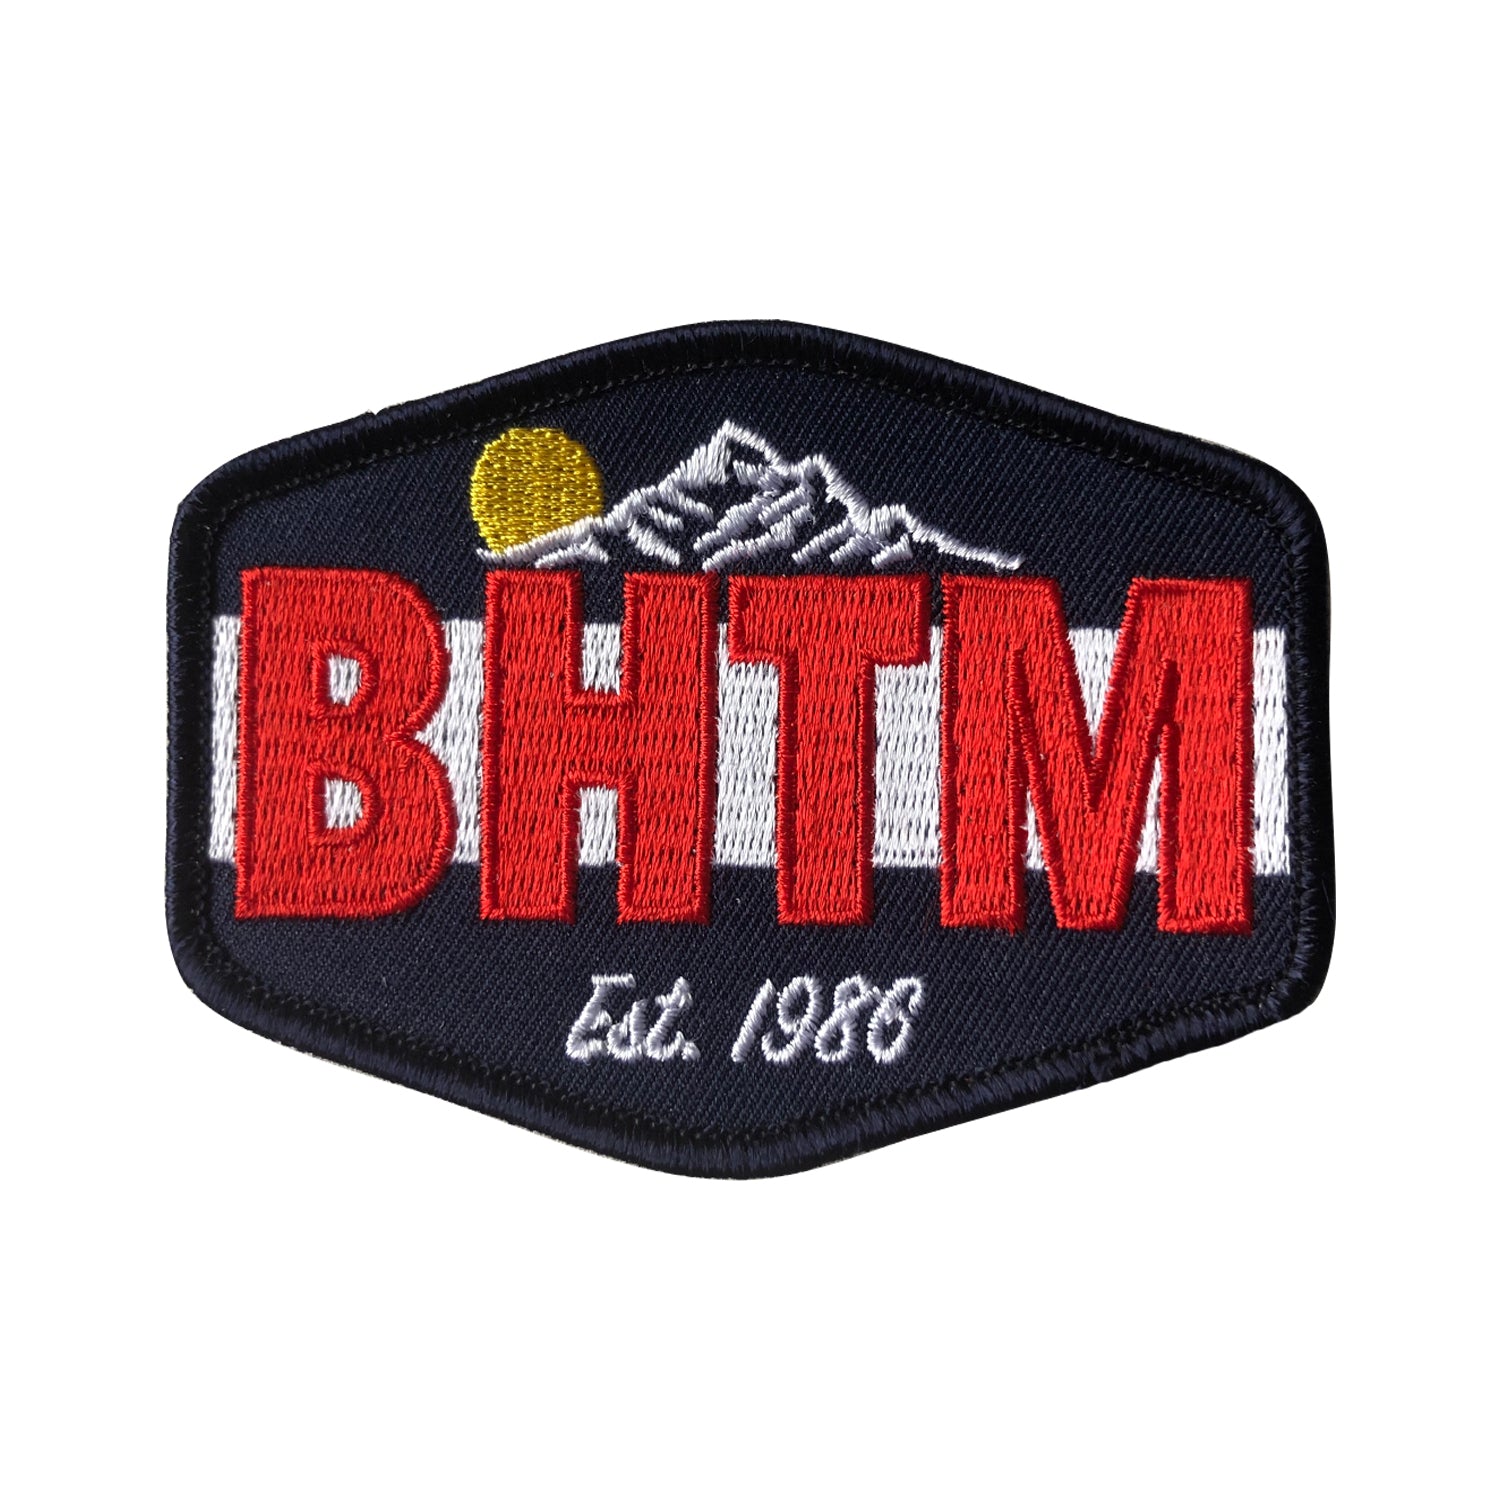 BHTM Mountain Patch